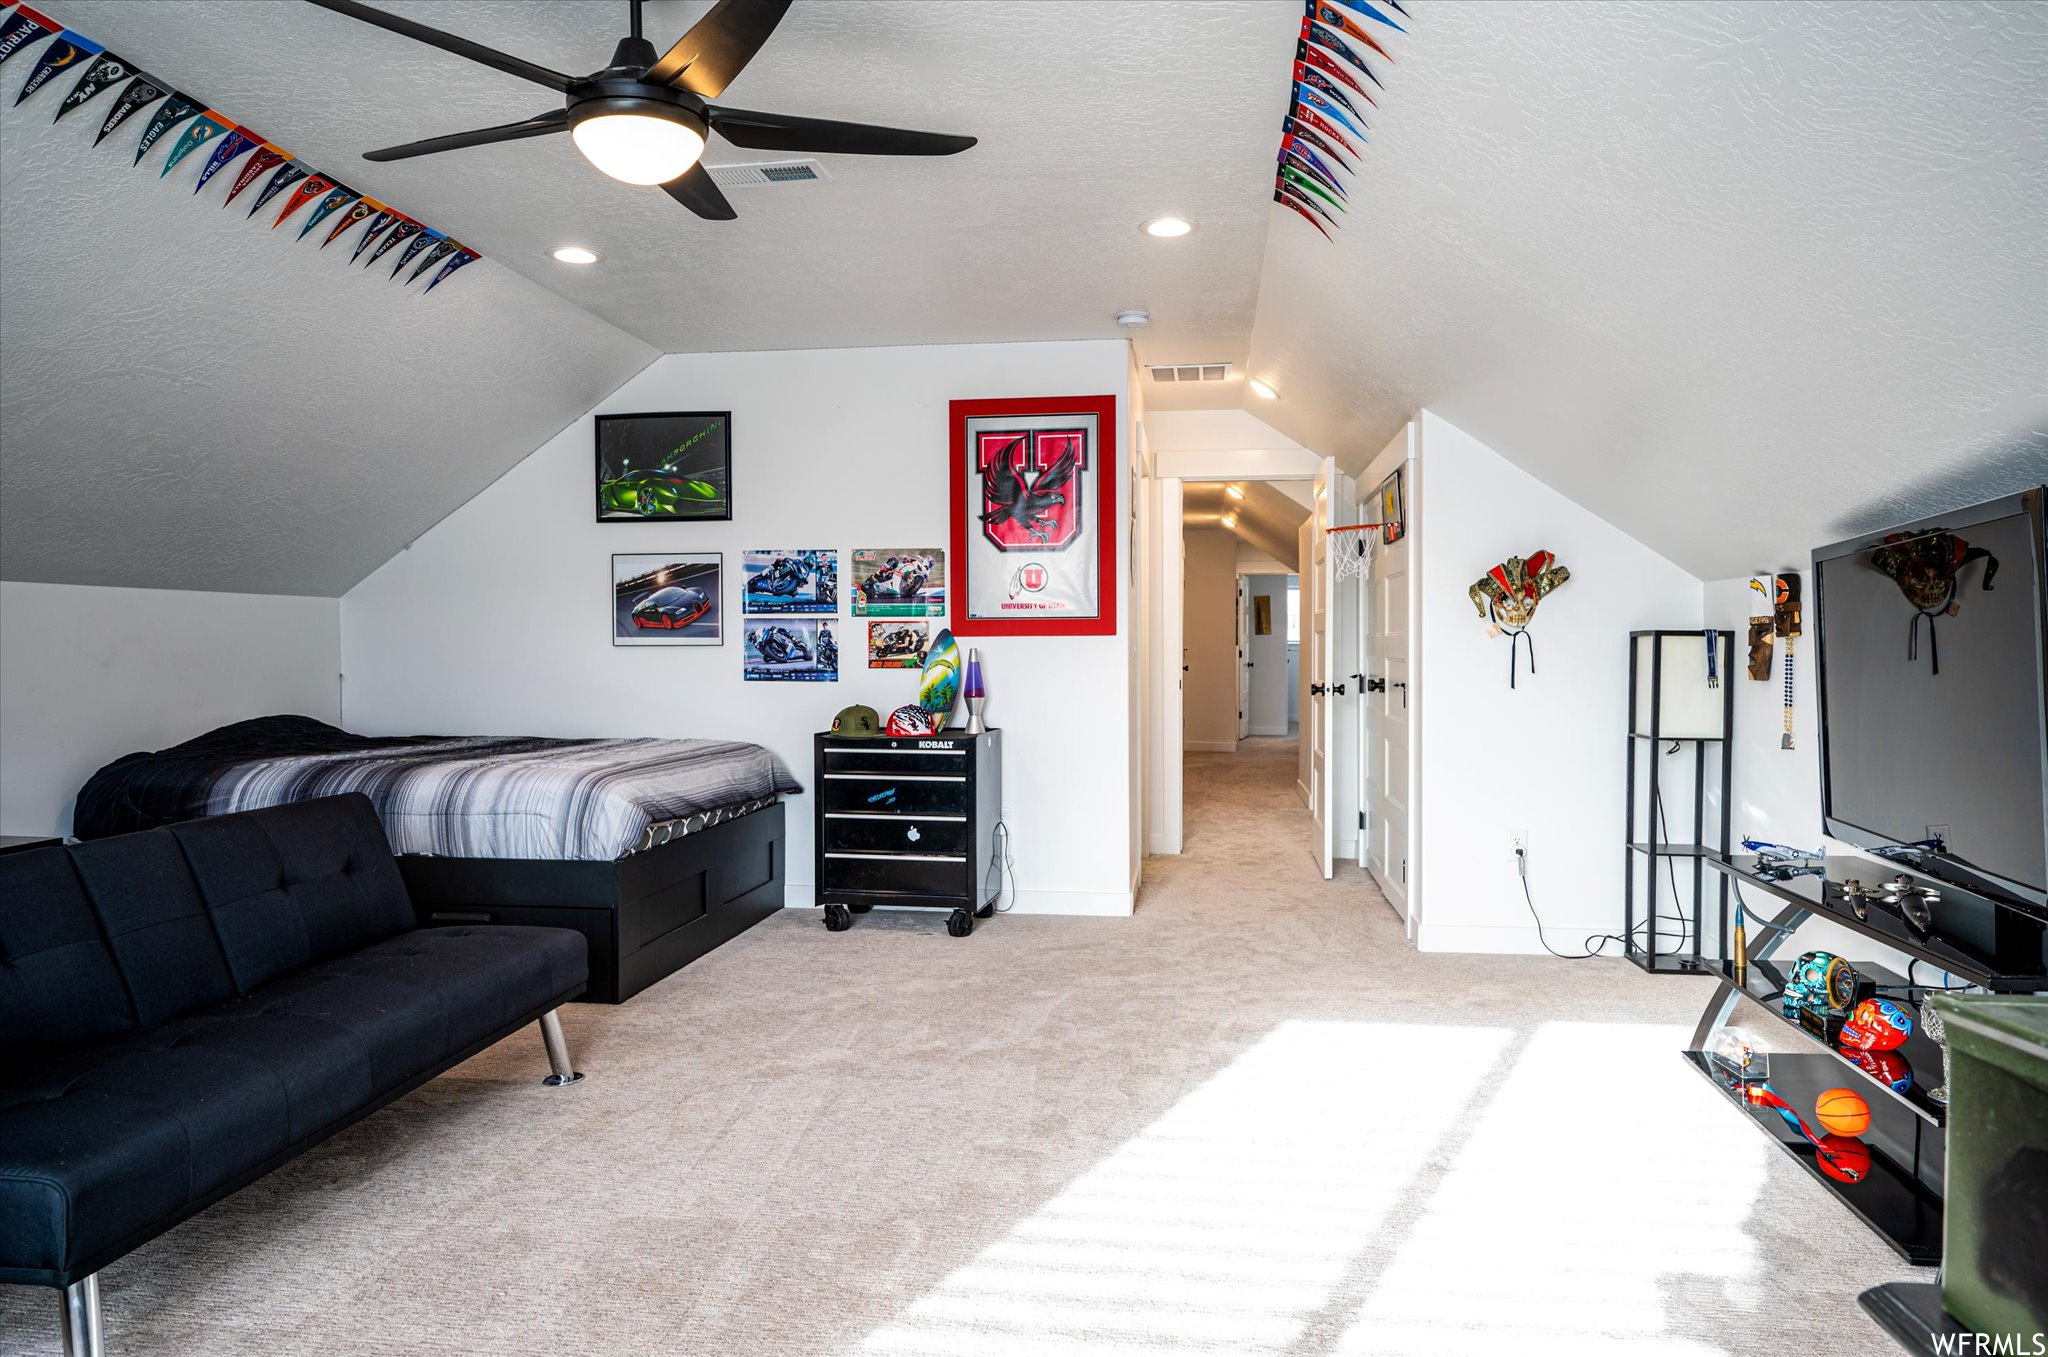 Bedroom with light colored carpet, ceiling fan, a textured ceiling, and vaulted ceiling